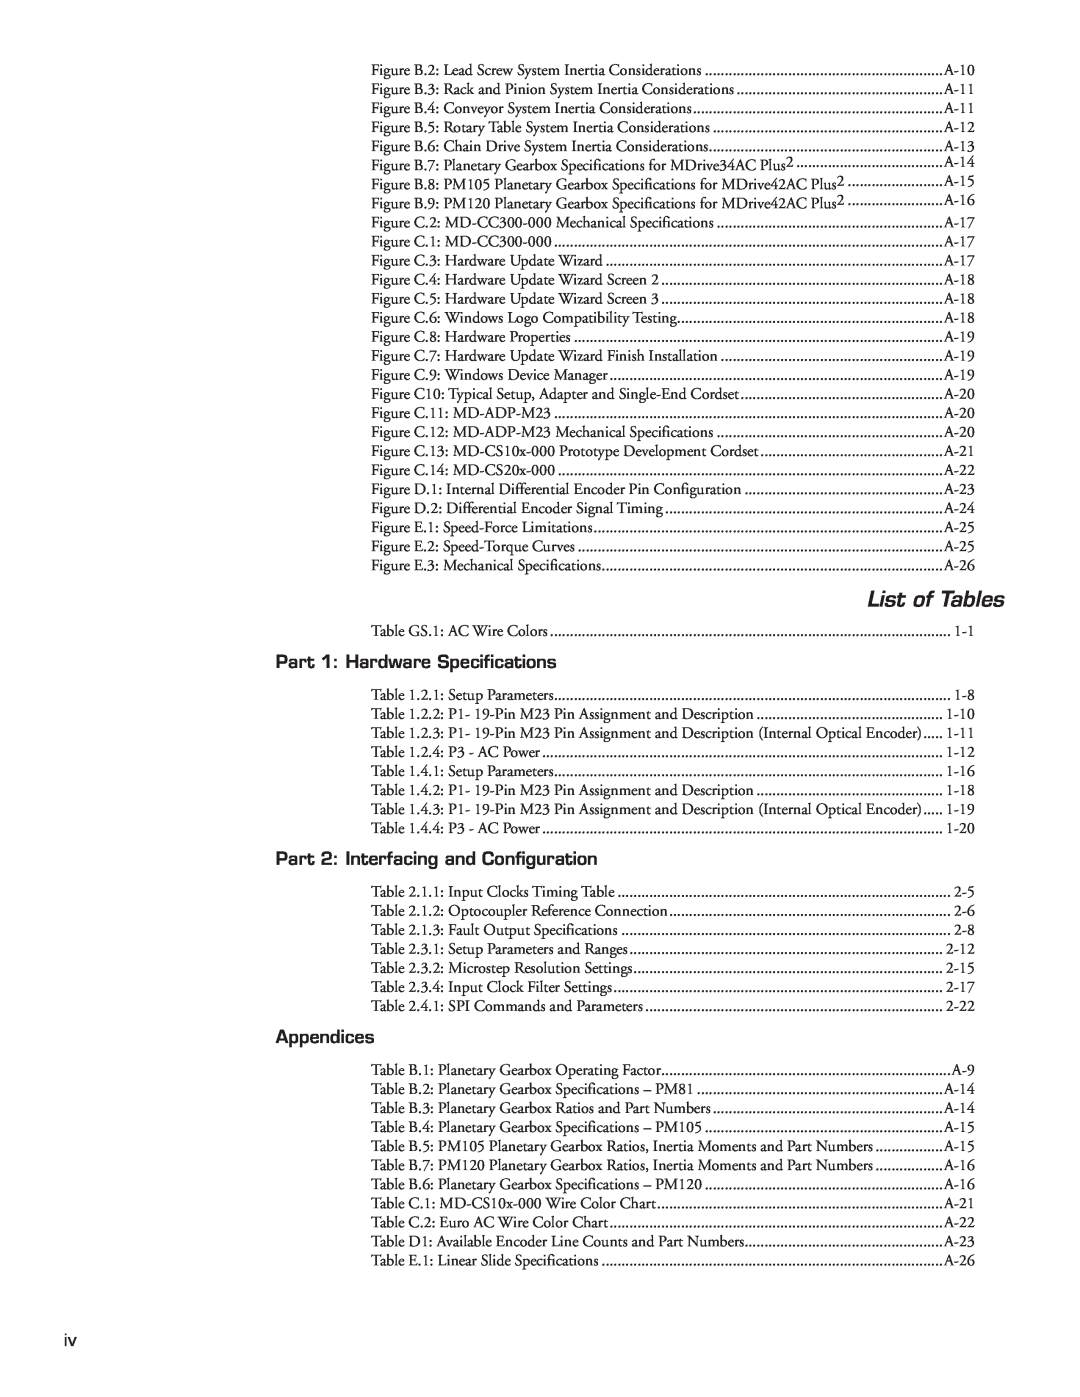 Intelligent Motion Systems MDrive34AC manual List of Tables, Part 1: Hardware Specifications, Appendices 